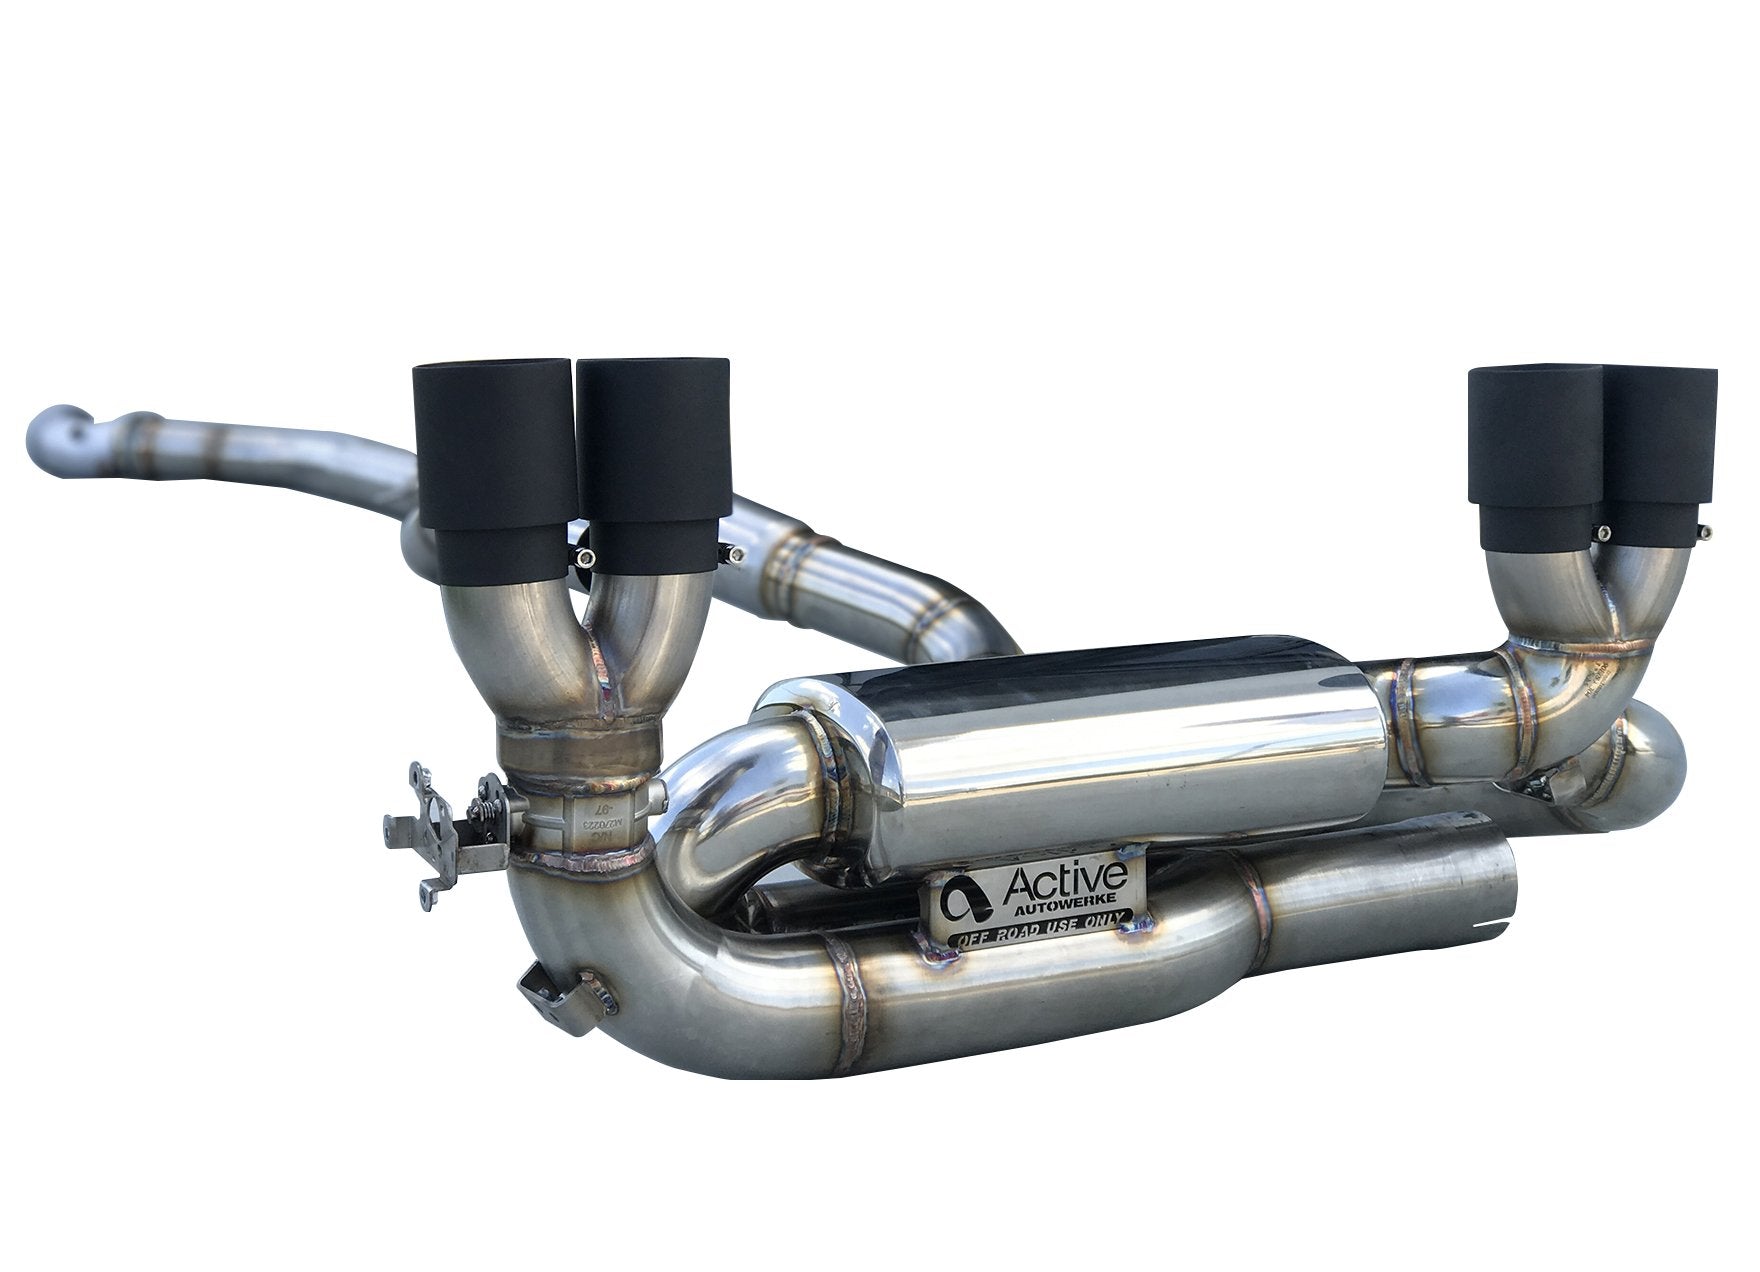 F87 M2 COMPETITION SIGNATURE EXHAUST SYSTEM INCLUDES ACTIVE F-BRACE - 0